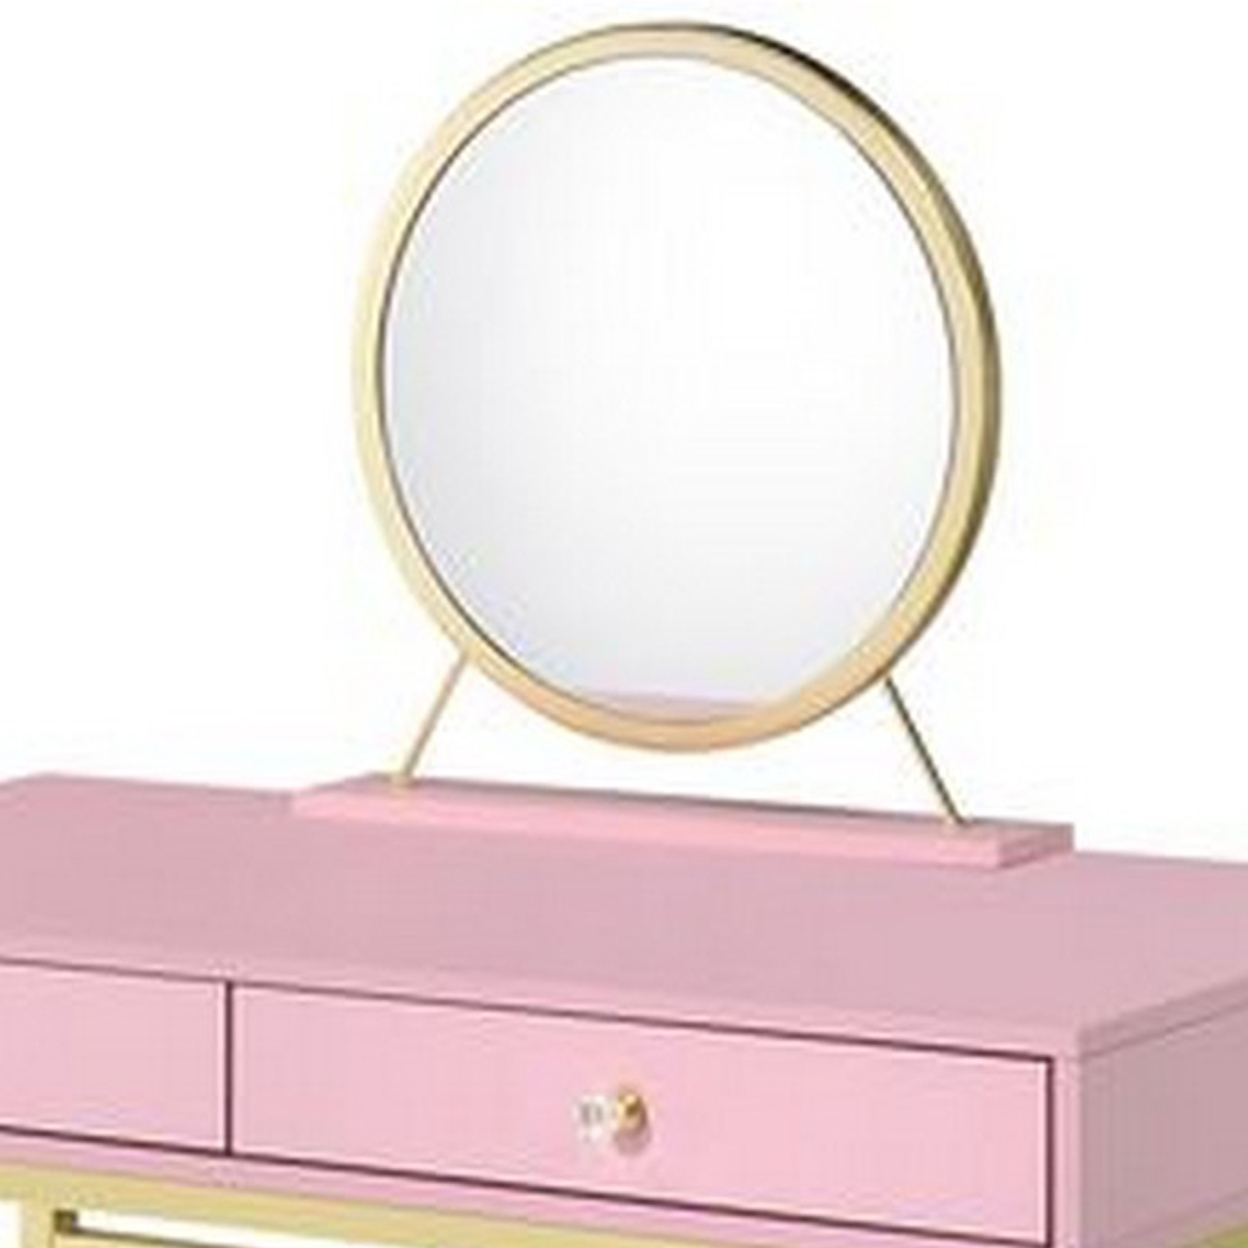 Vanity Desk With Removable Mirror And Open Metal Frame, Pink And Gold- Saltoro Sherpi